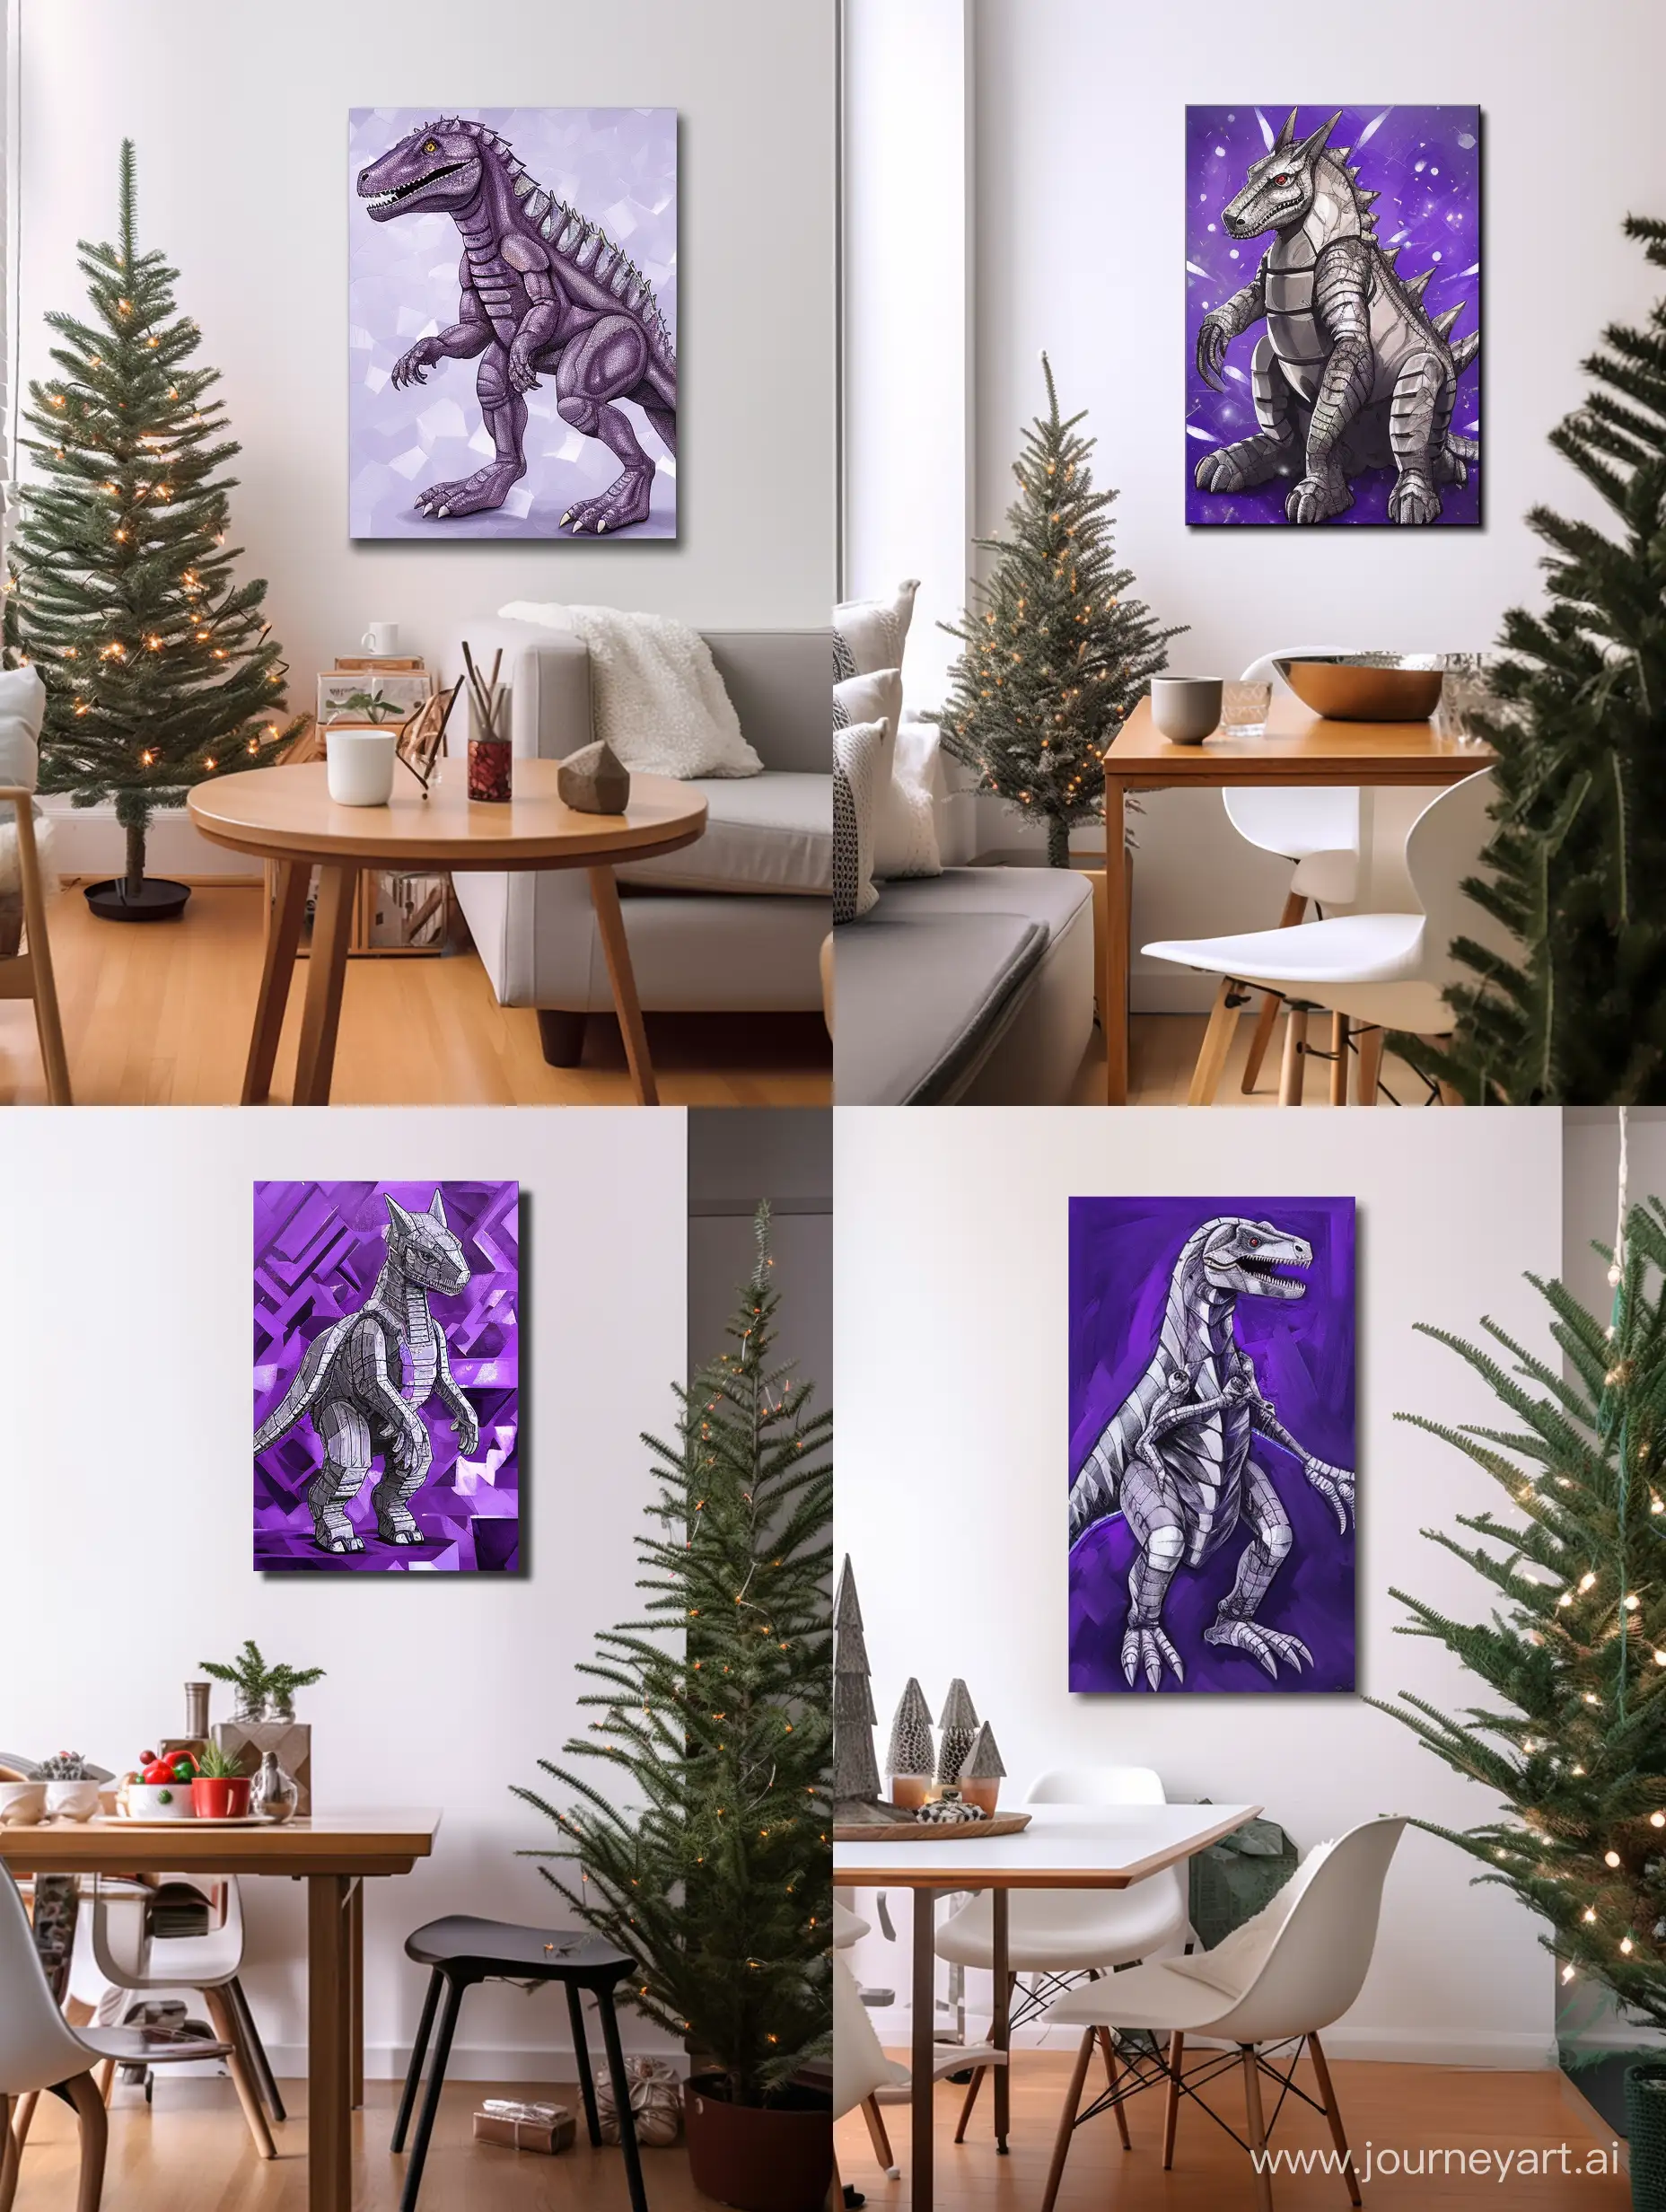 The robot furry protogen is a silver dinosaur with a dark purple display. he is a tyrannosaurus robot, he is made of metal and his eyes are glowing, purple with silver, climbs on a Christmas tree to get a star, painted with paint on canvas, children's drawing style
Abstract Expressionist Style